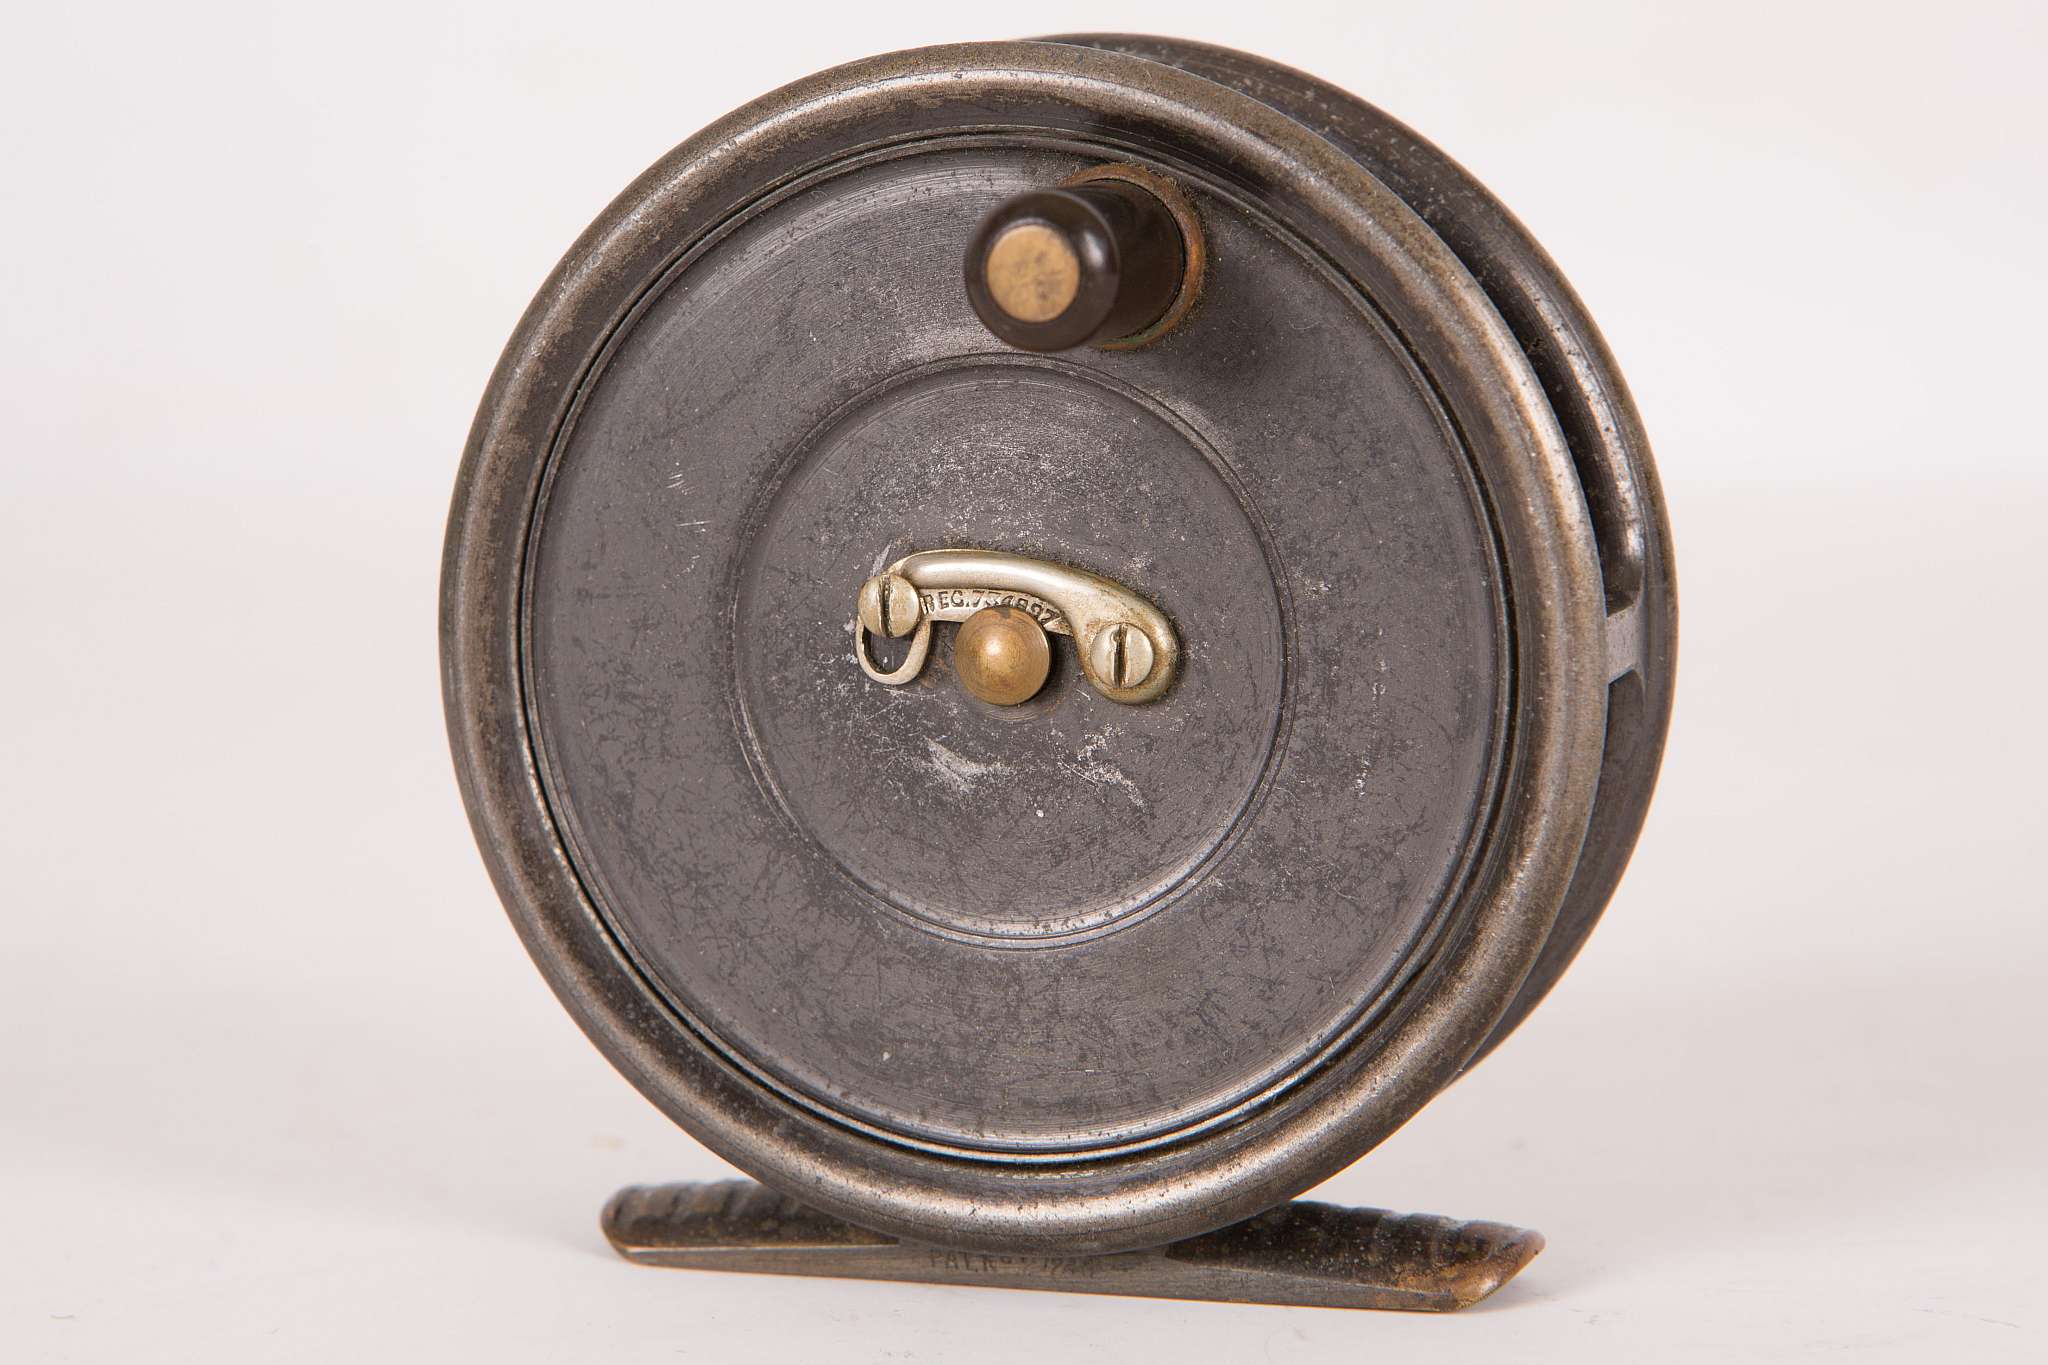 A rare Hardy Bros. 'Unique' fly reel (duplicated Mk. II)